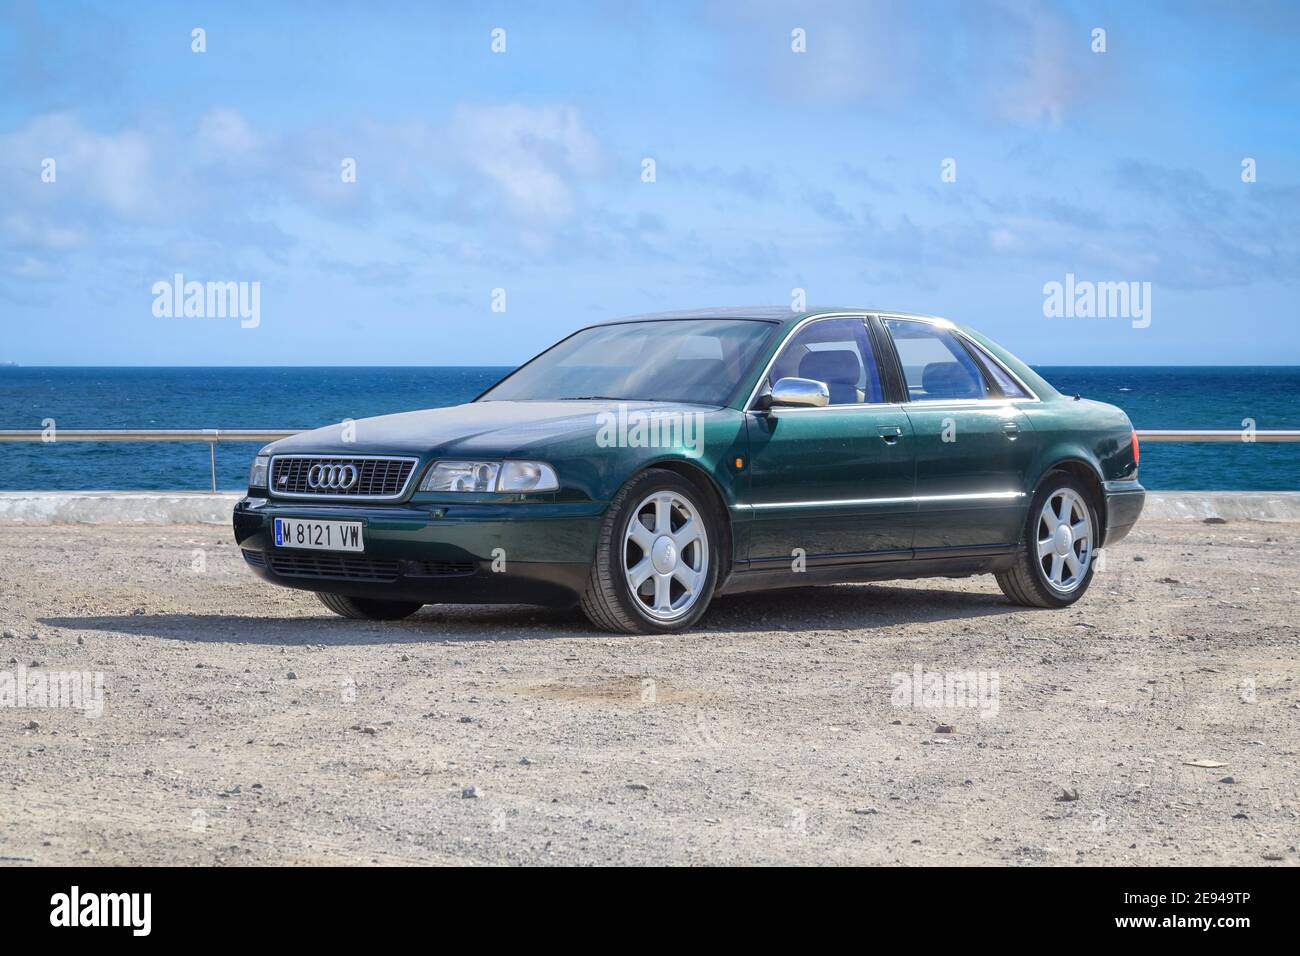 SABADELL, SPAIN-FEBRUARY 1, 2021: Audi S8 (First generation, D2, 1996 - 2003) parking next to sea Stock Photo